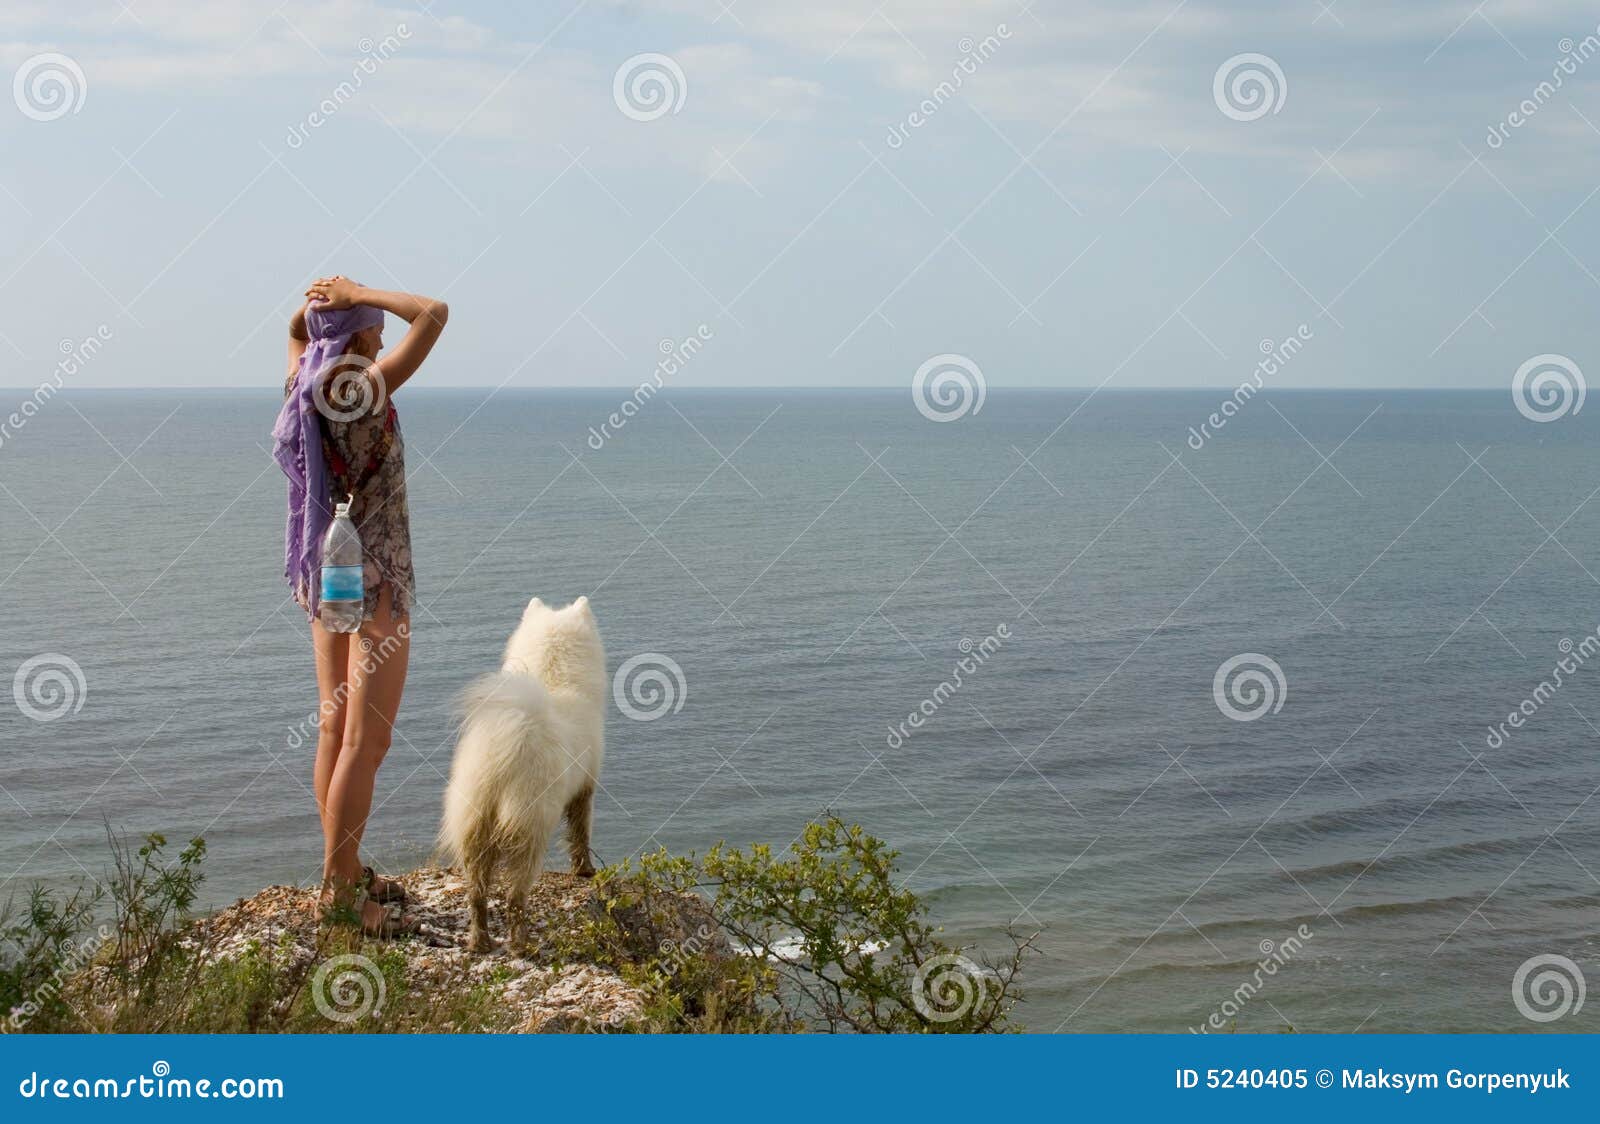 girl and dog standing on precipice